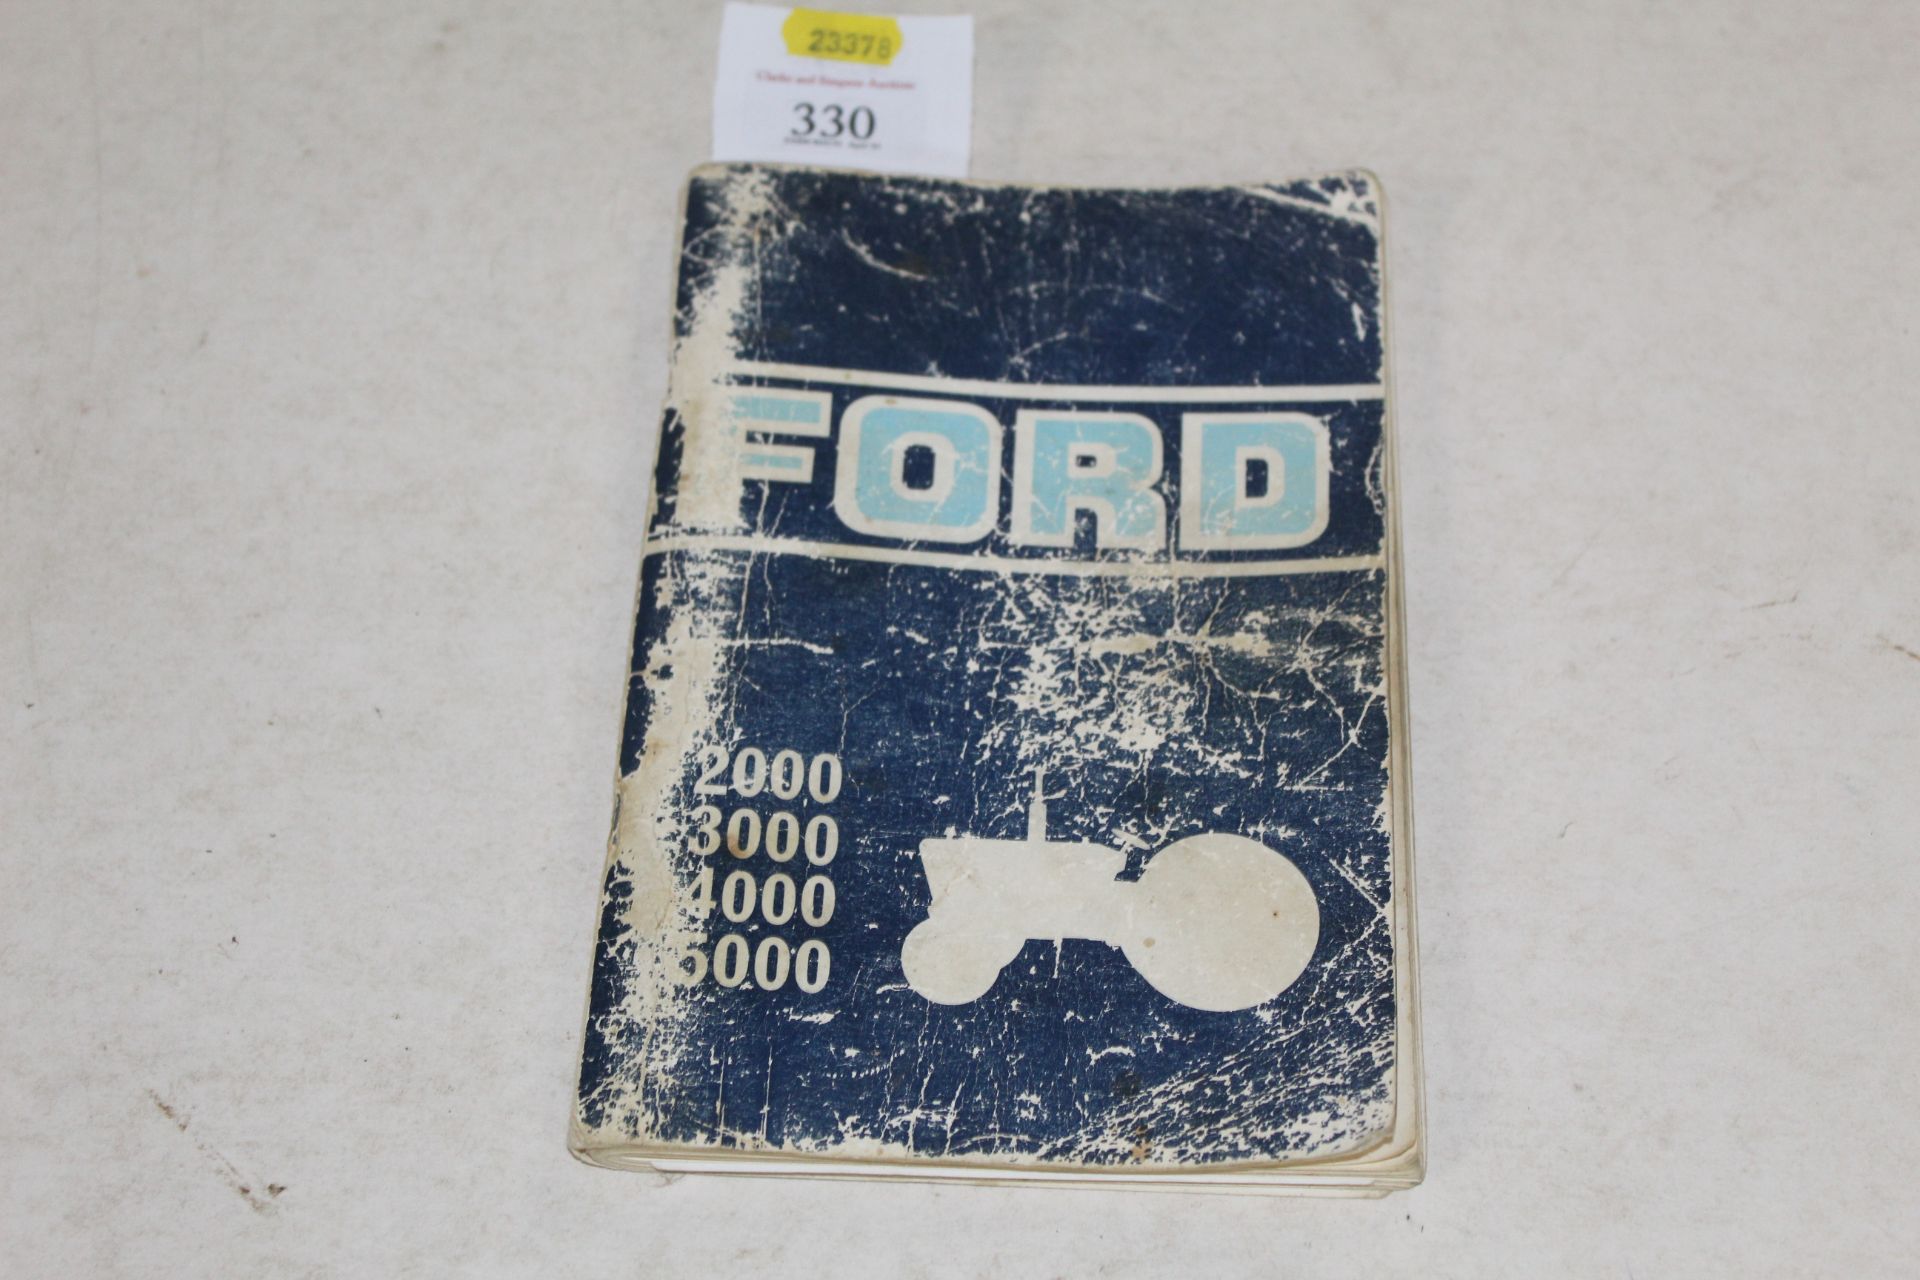 Ford 2000-5000 Tractor Operators Manual.